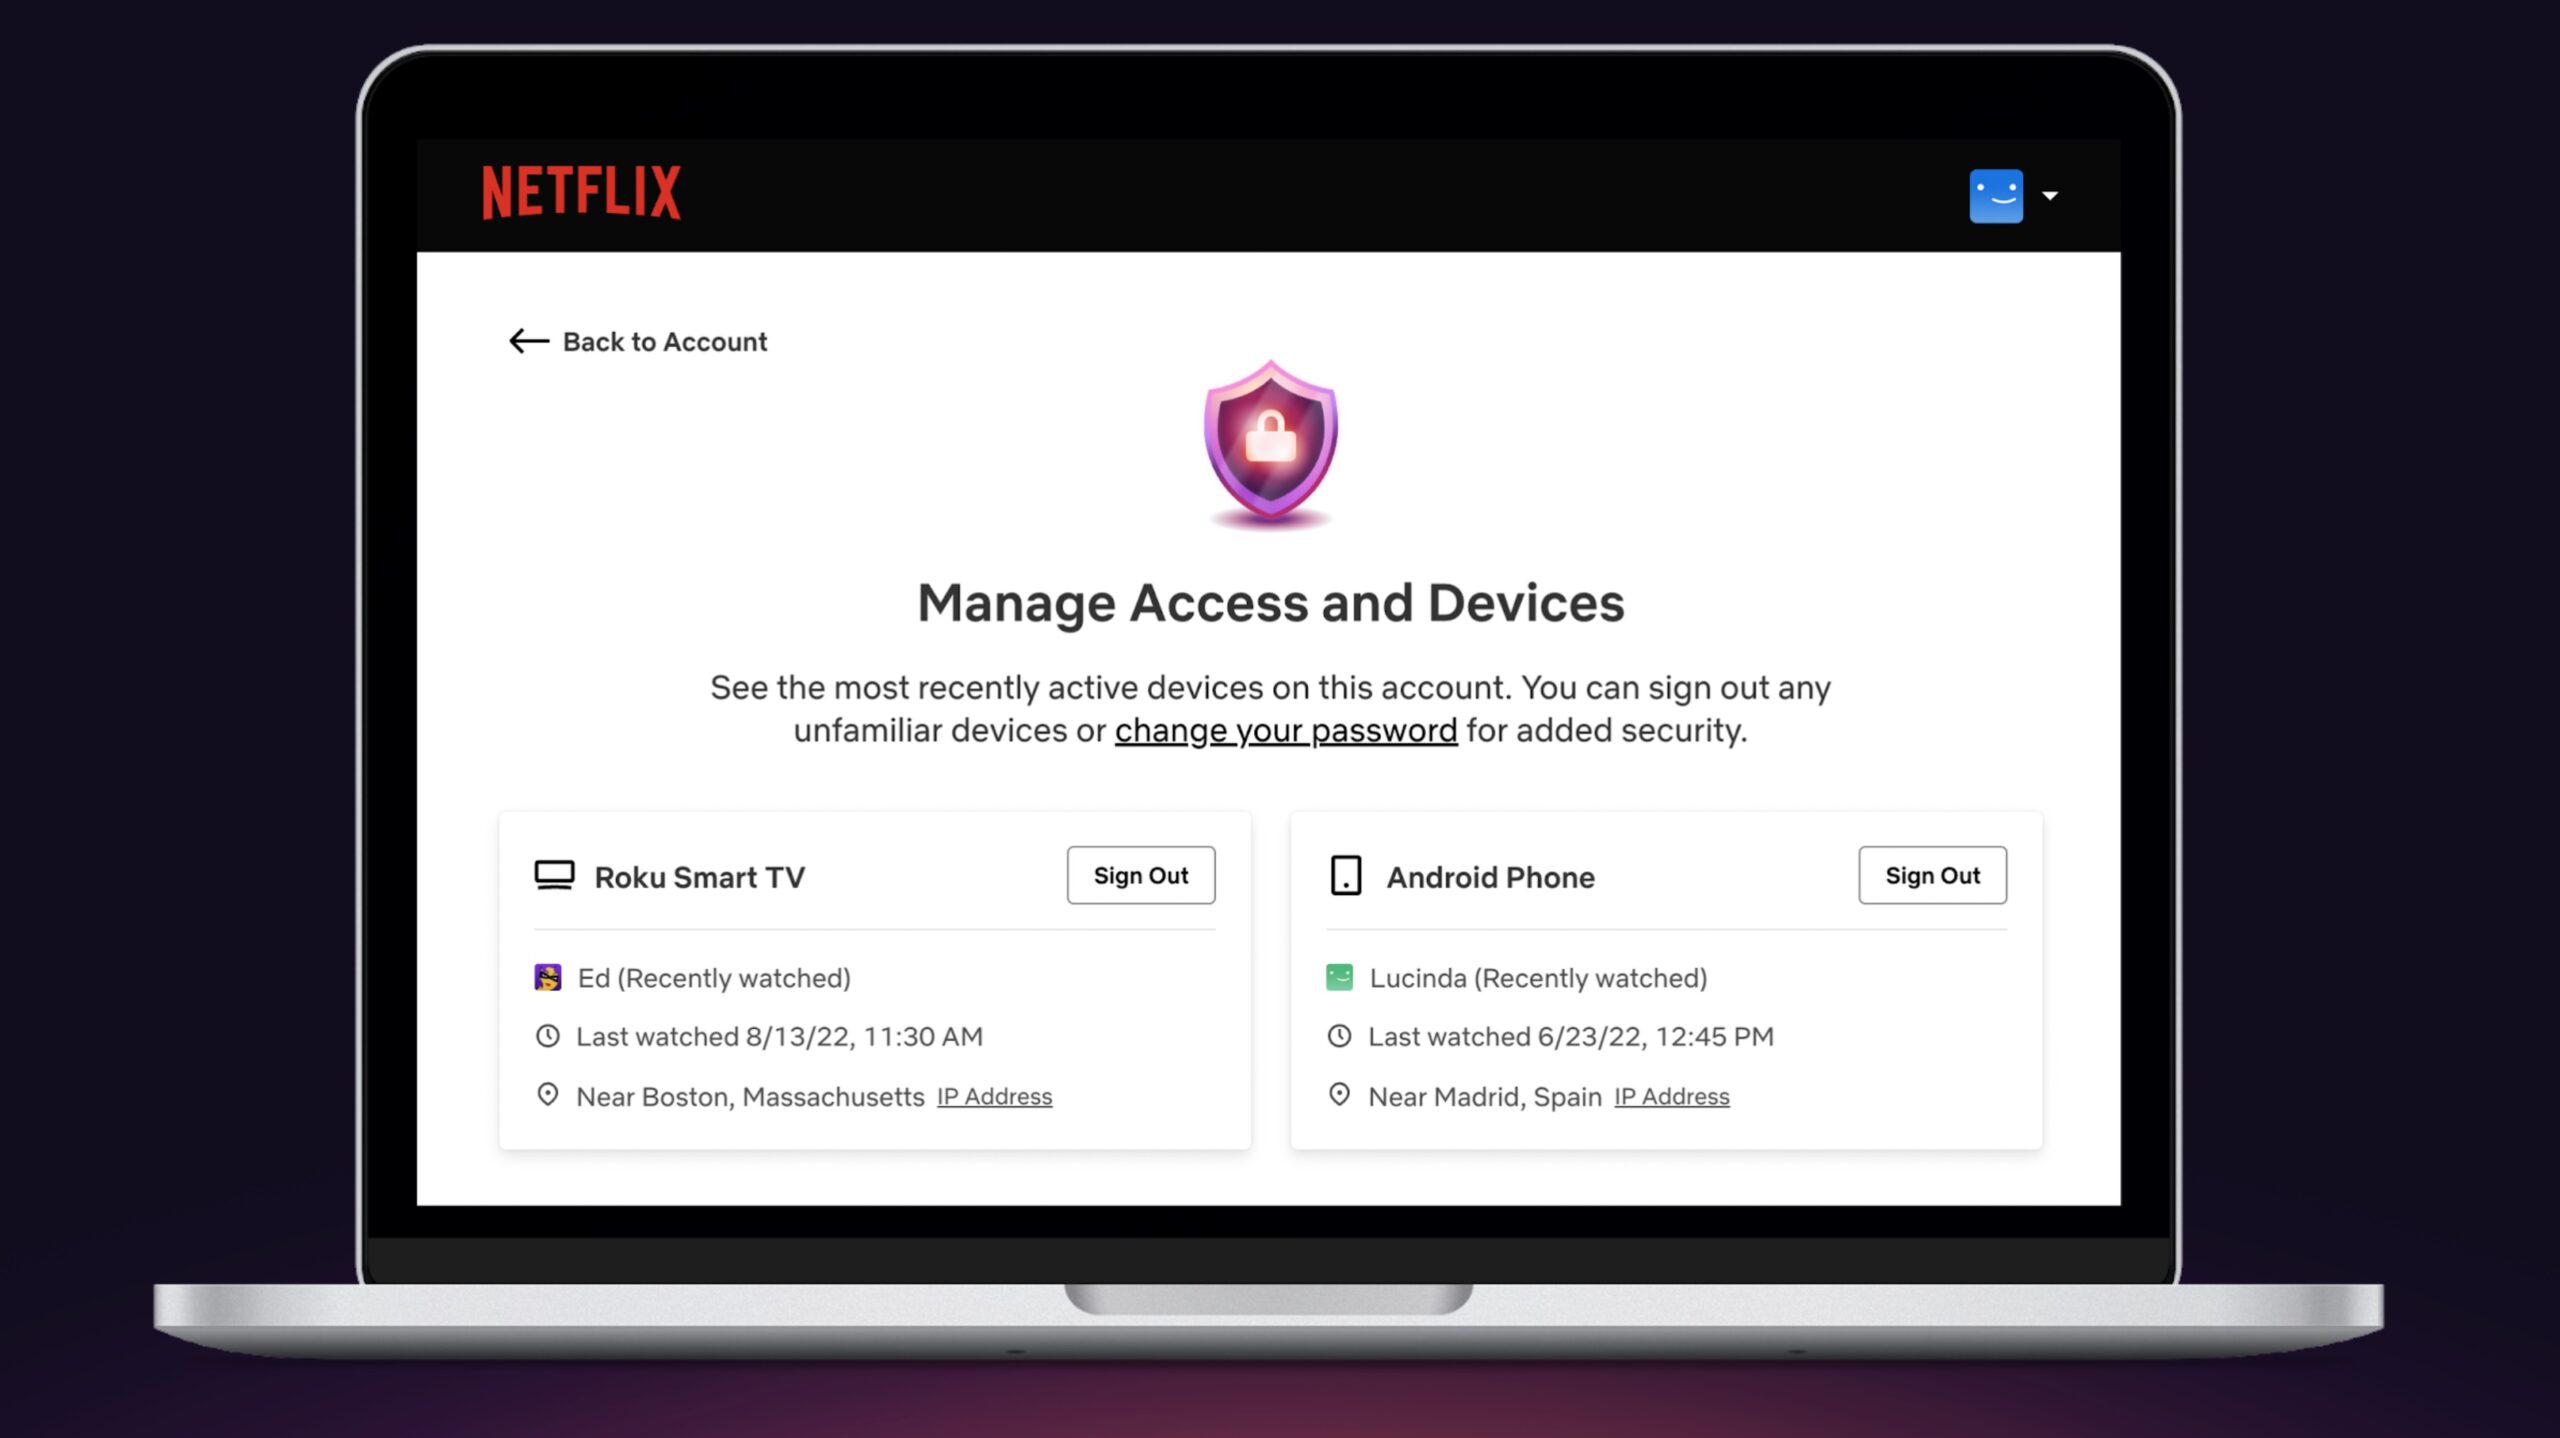 Netflix allows you to remotely remove devices from your account